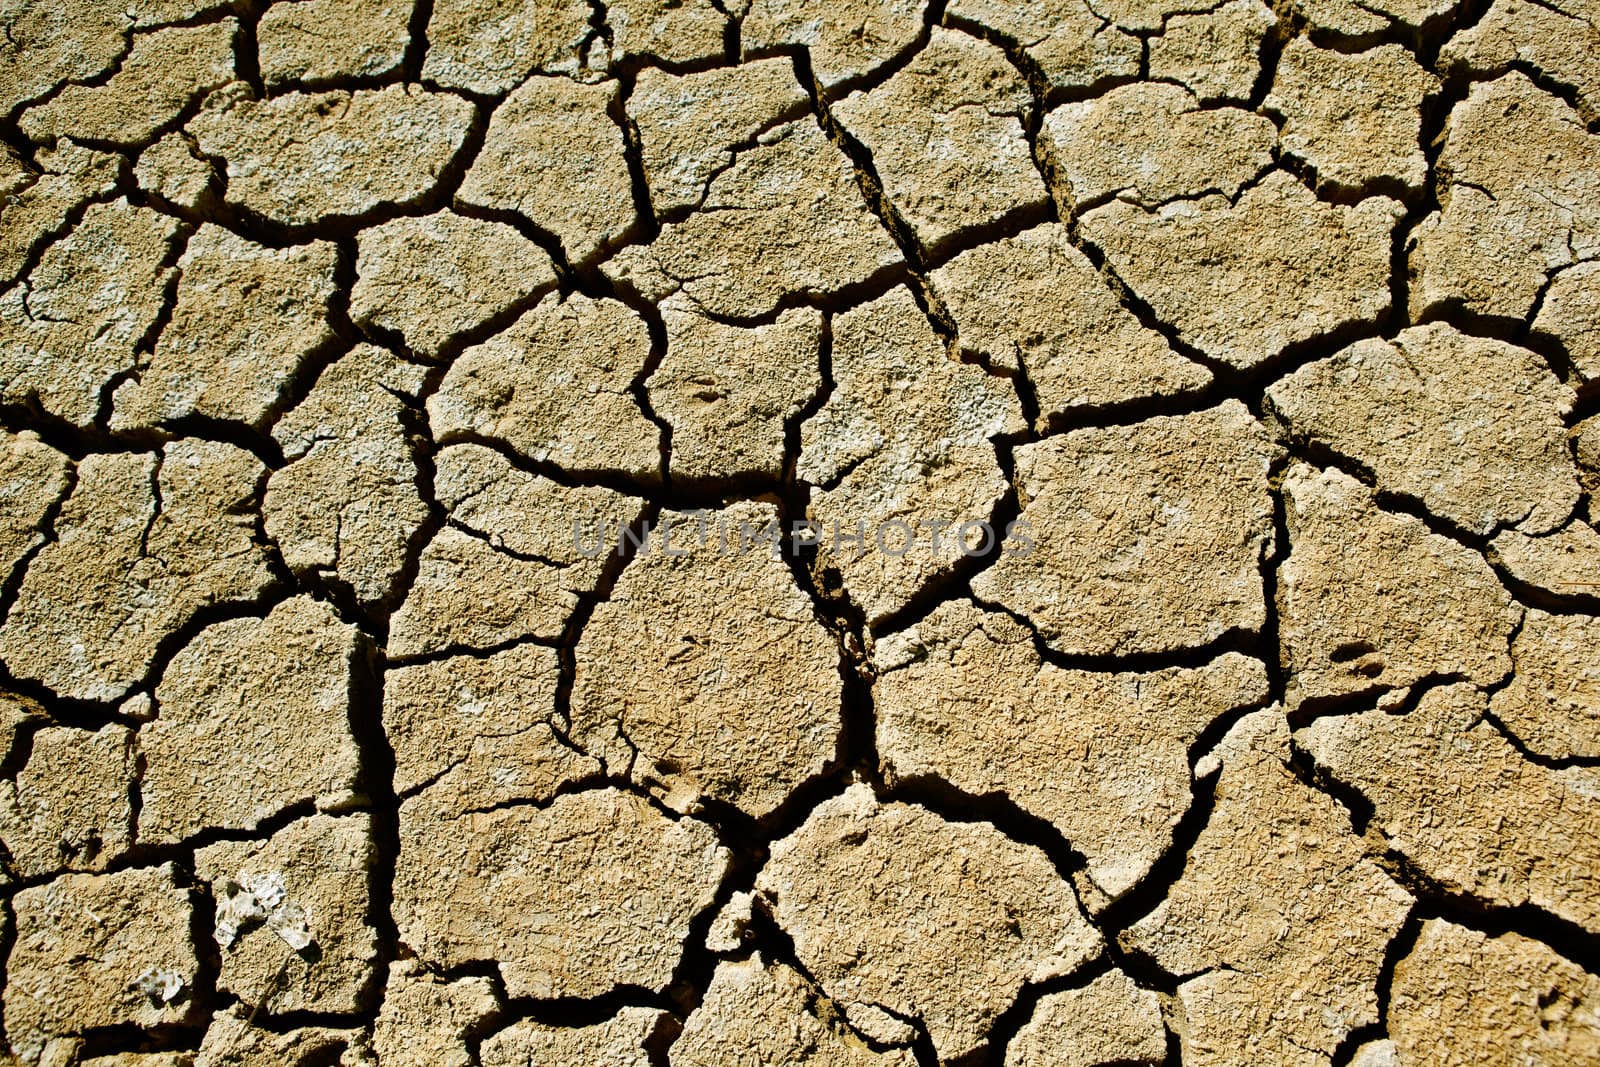 Close up image of cracked soil of a lake